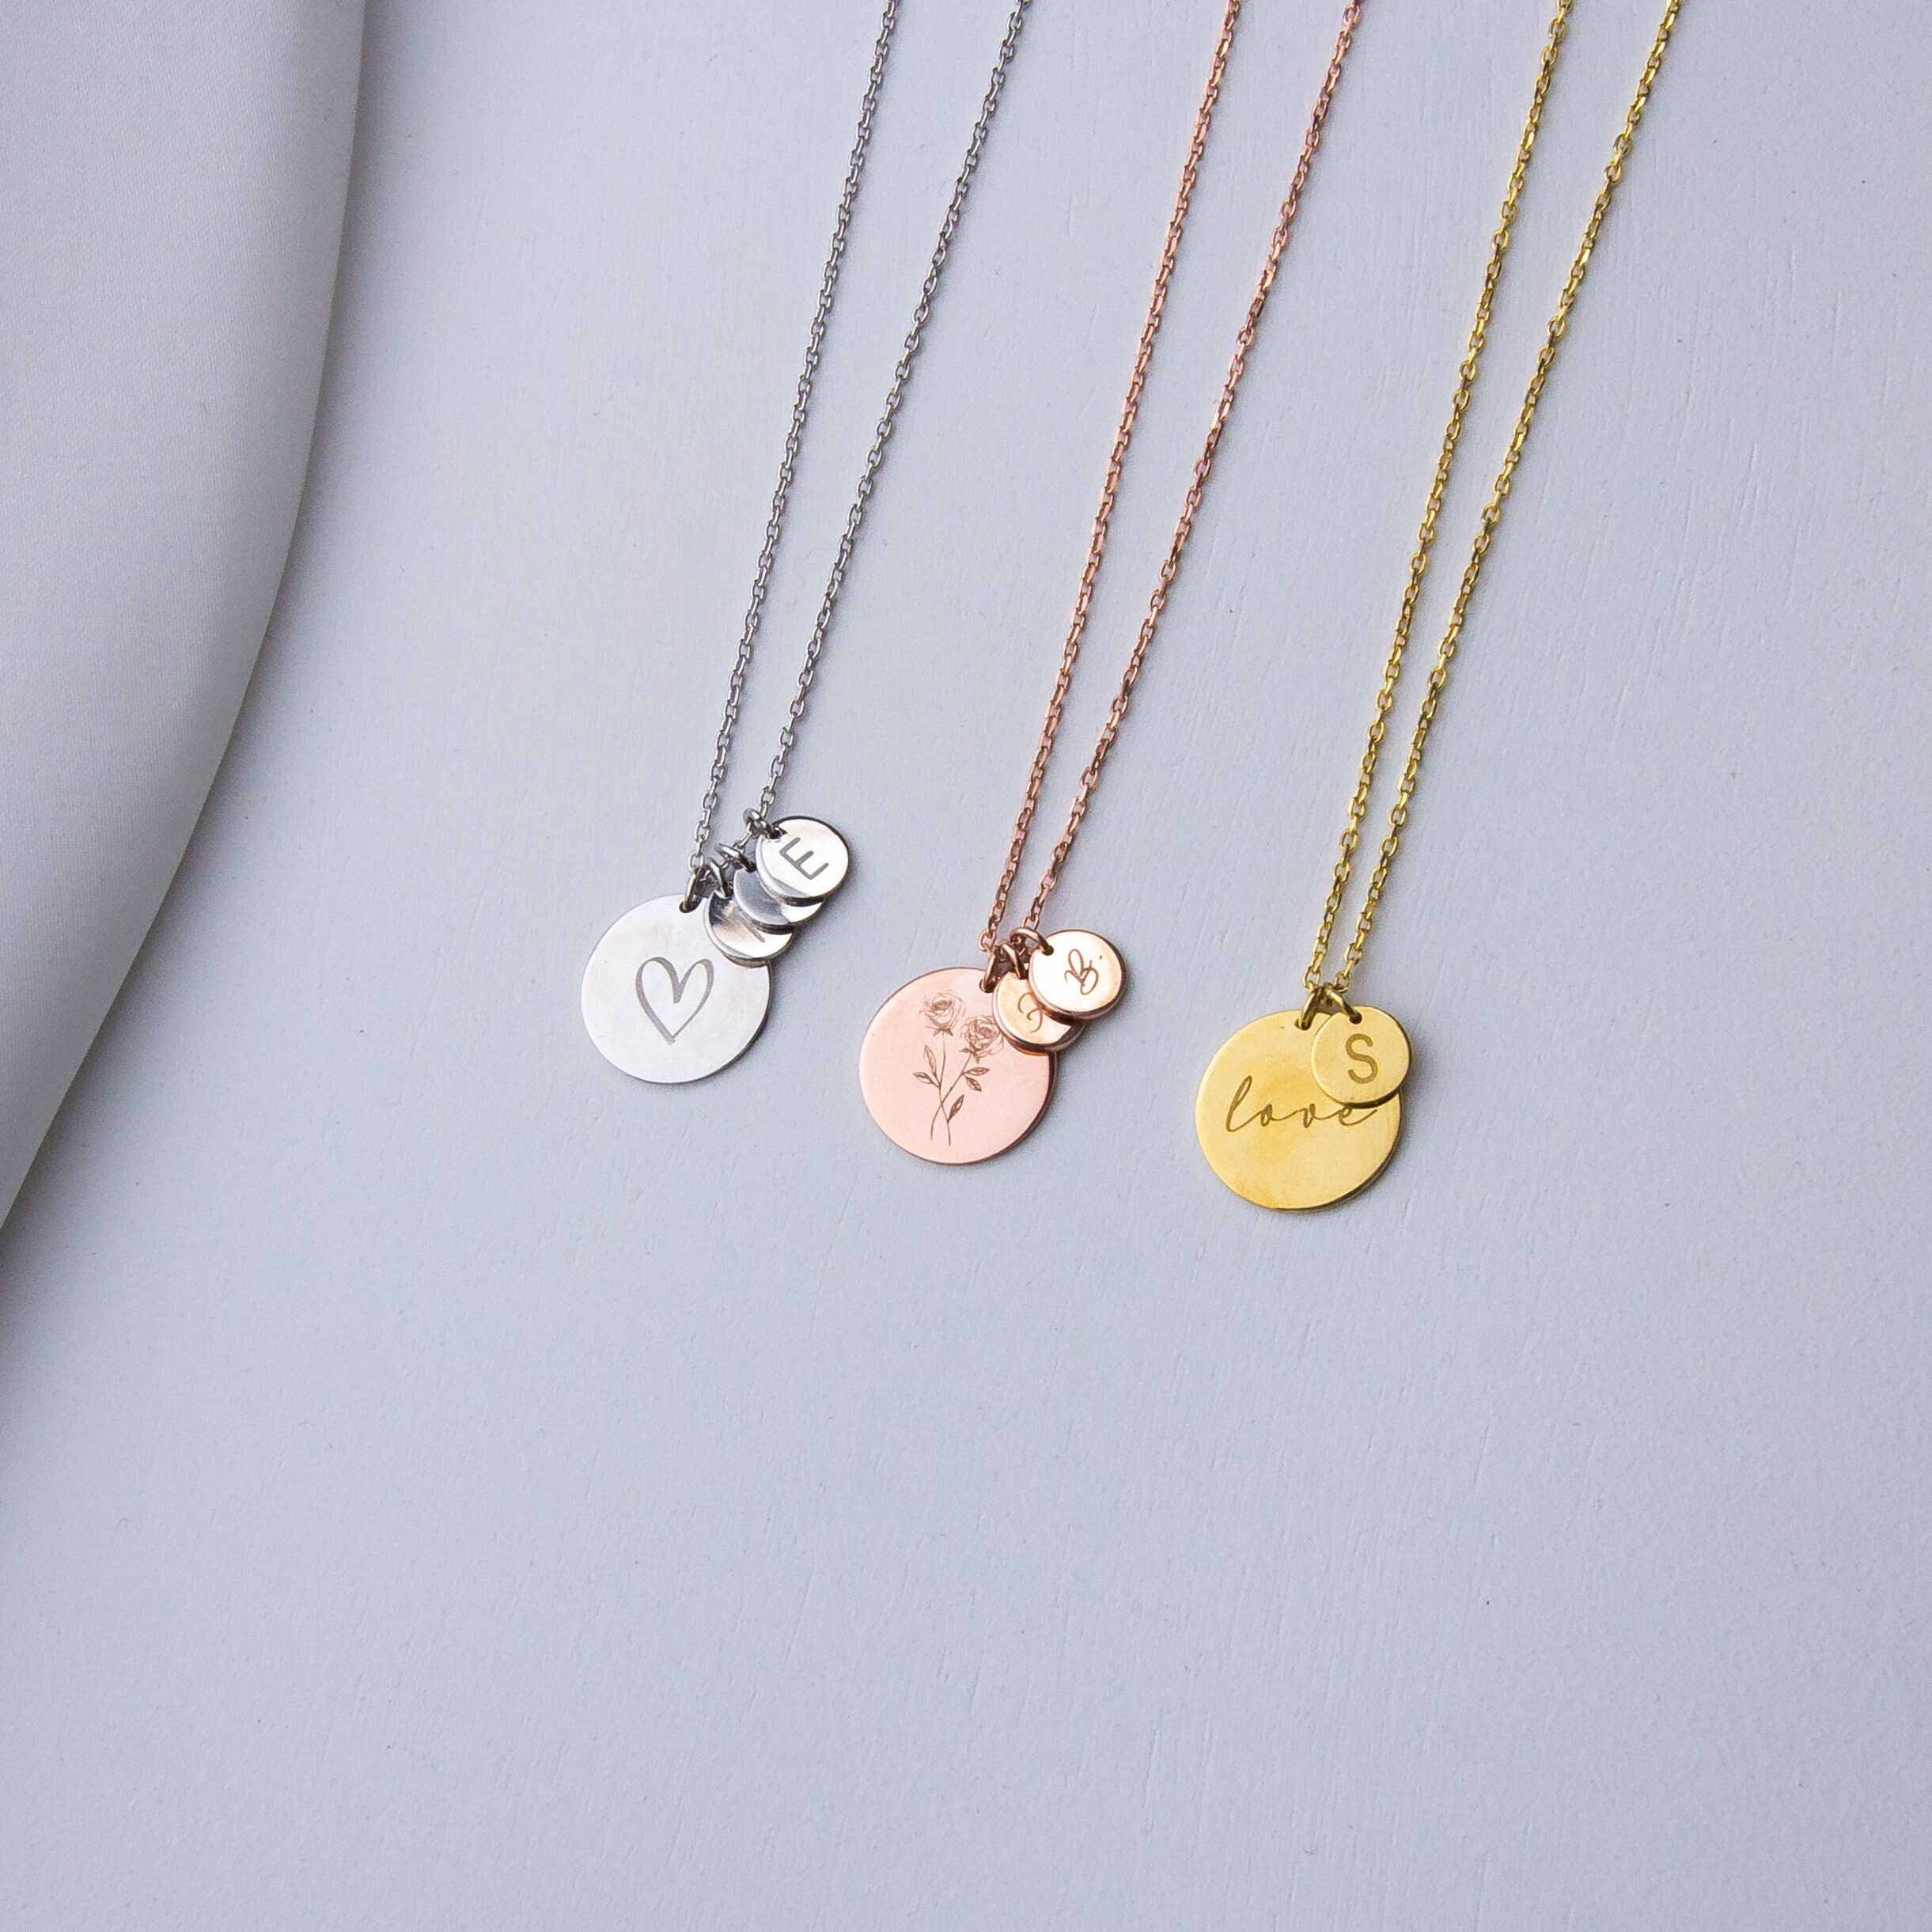 14k Gold Monogram Necklace,Personalized Necklace,Personalized  Jewelry,Personalized Gift,Letter Necklace-Initial Necklace-JX04